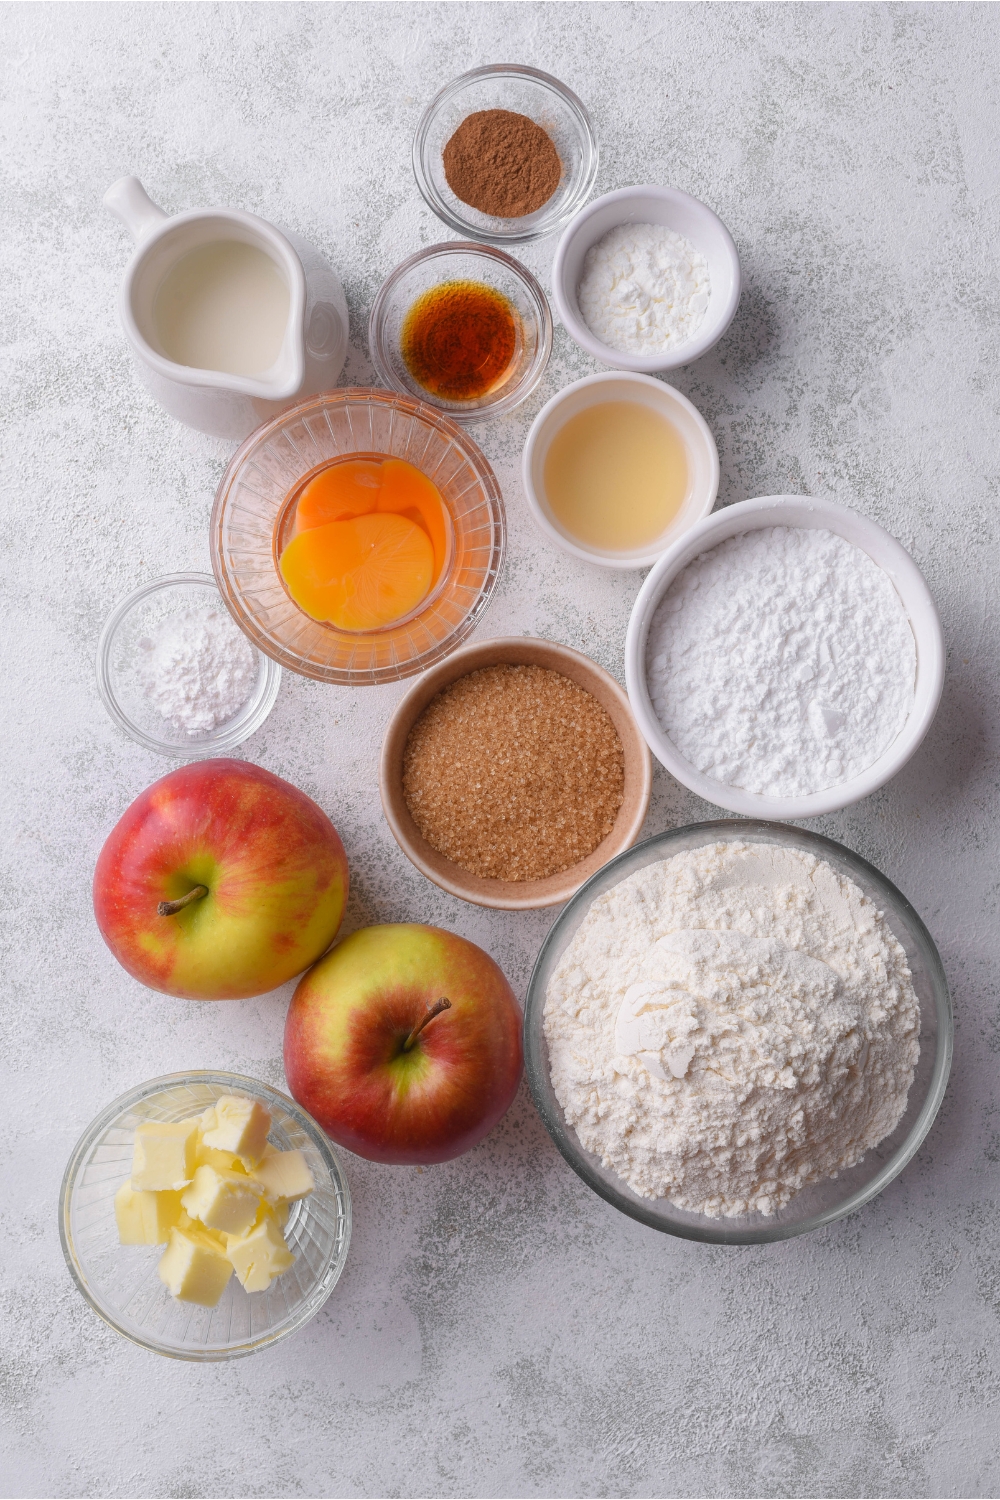 An assortment of ingredients including bowls of flour, powdered sugar, vanilla extract, brown sugar, butter cubes, a beaten egg, a jar of milk, and two apples.